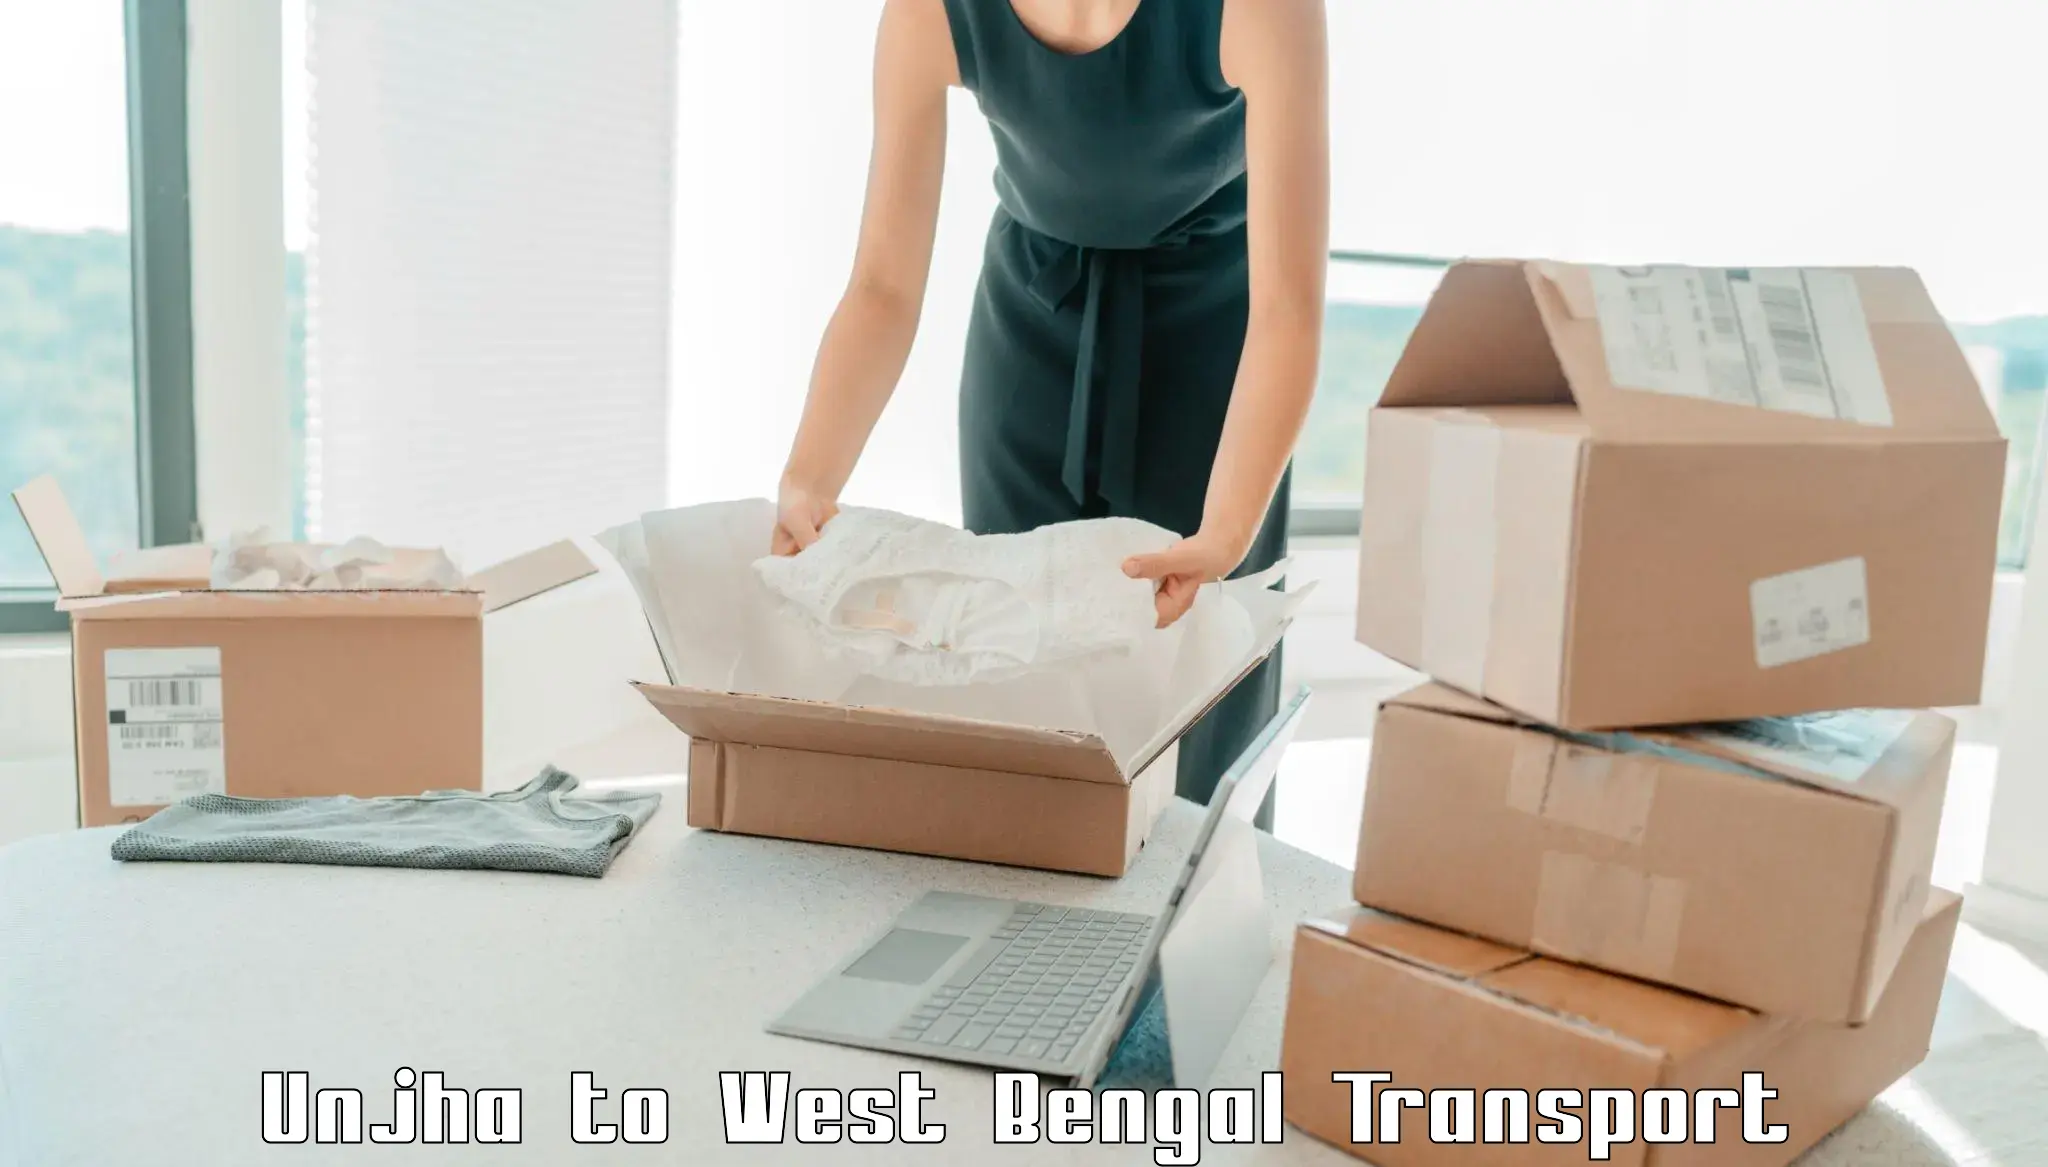 Online transport service Unjha to West Bengal